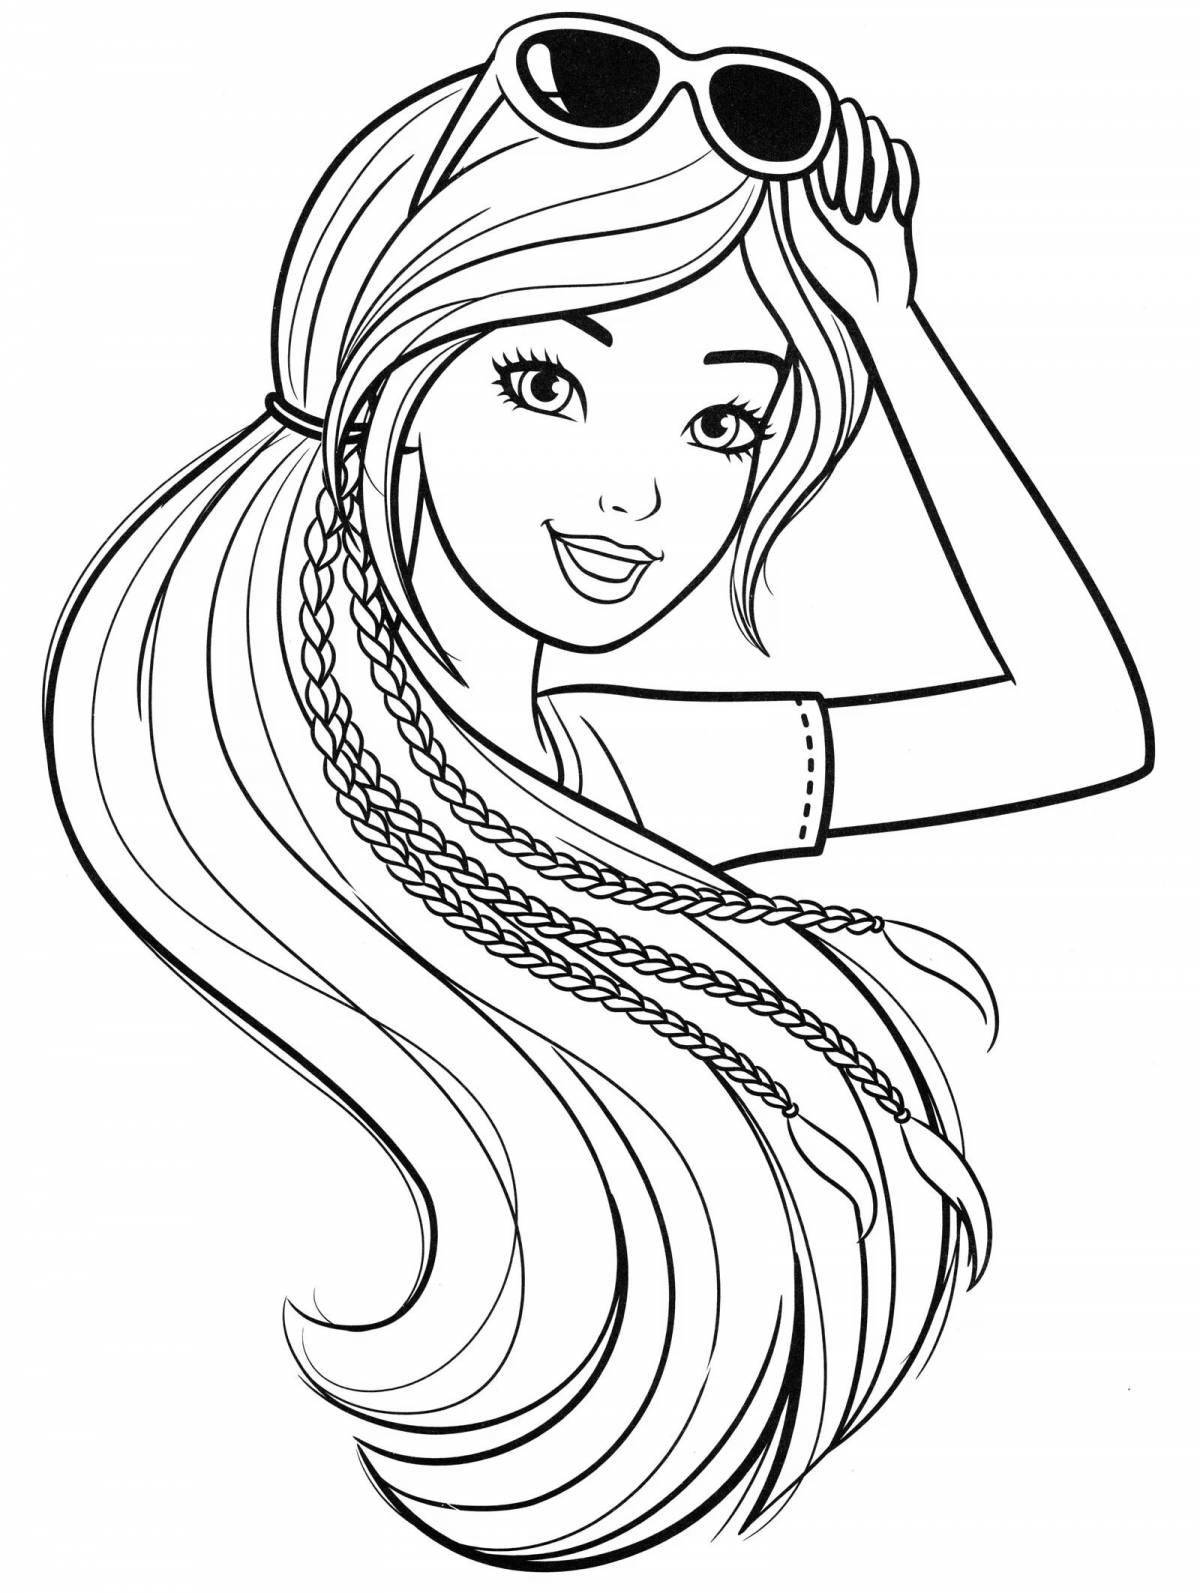 Radiant coloring book for girls 10-12 years old